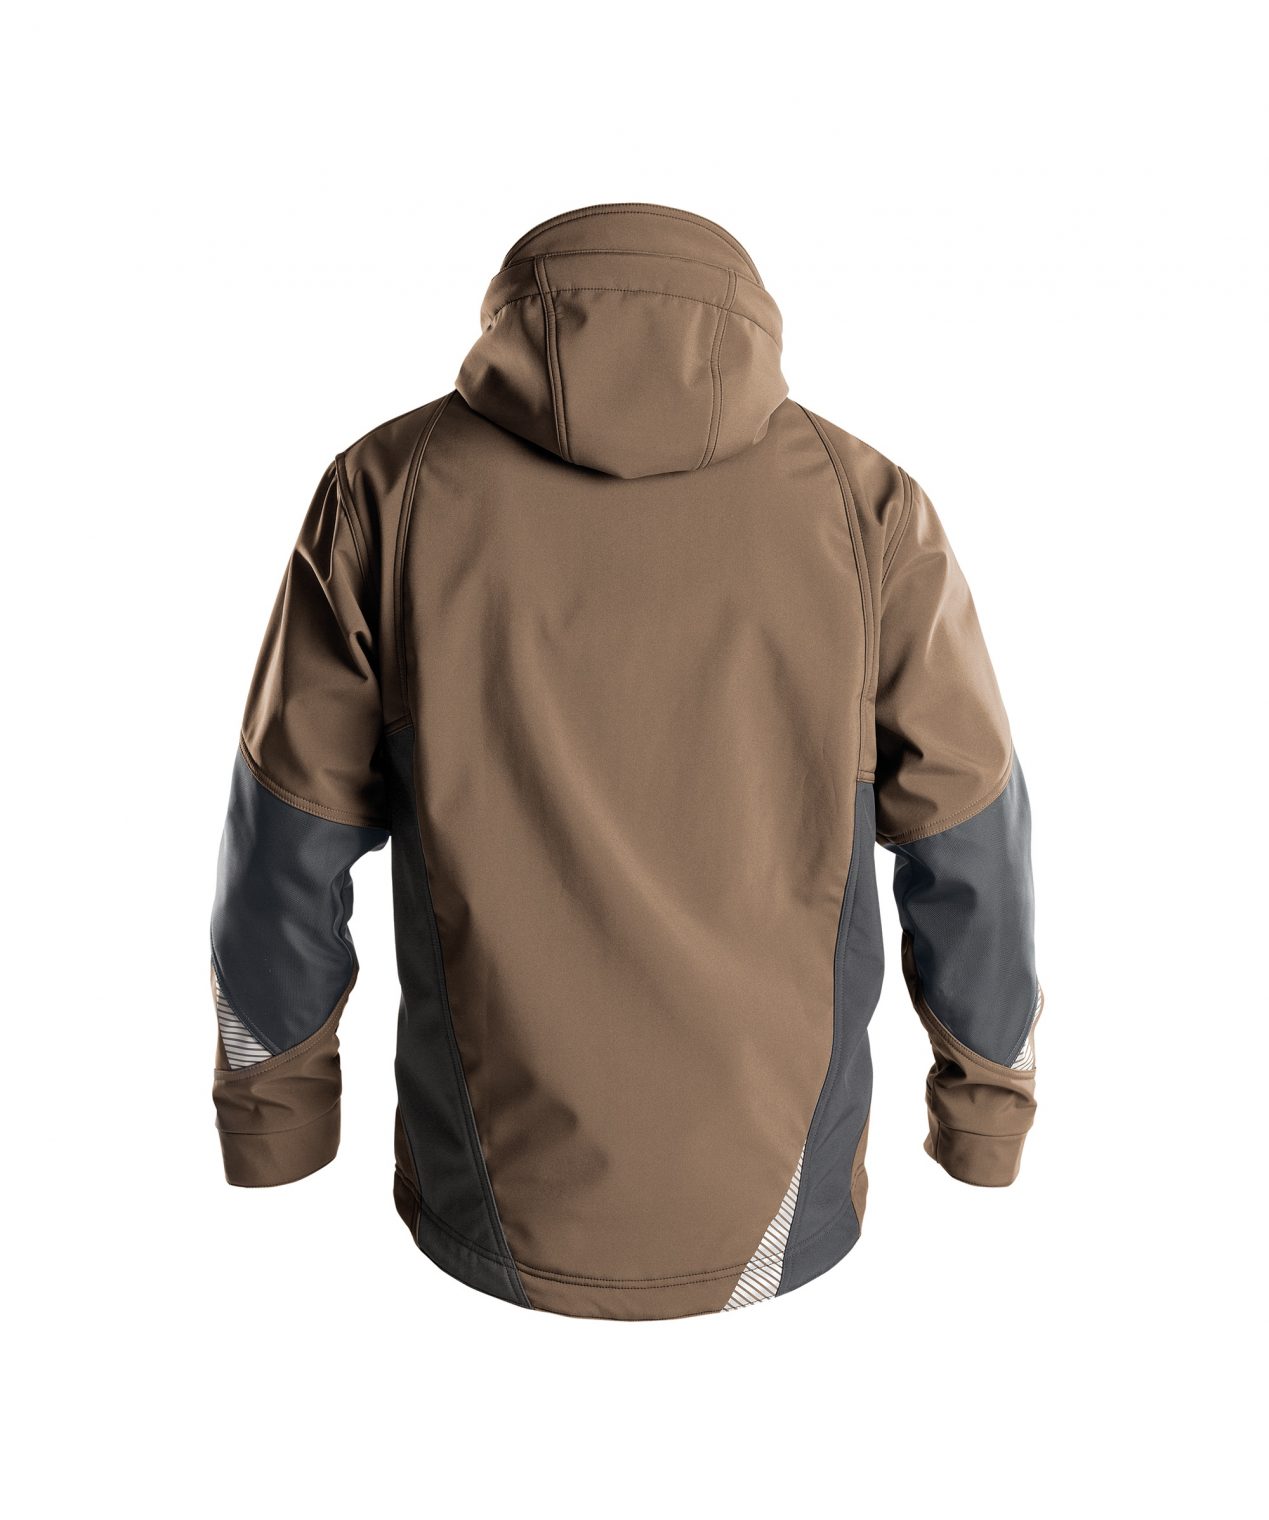 gravity softshell jacket clay brown anthracite grey back